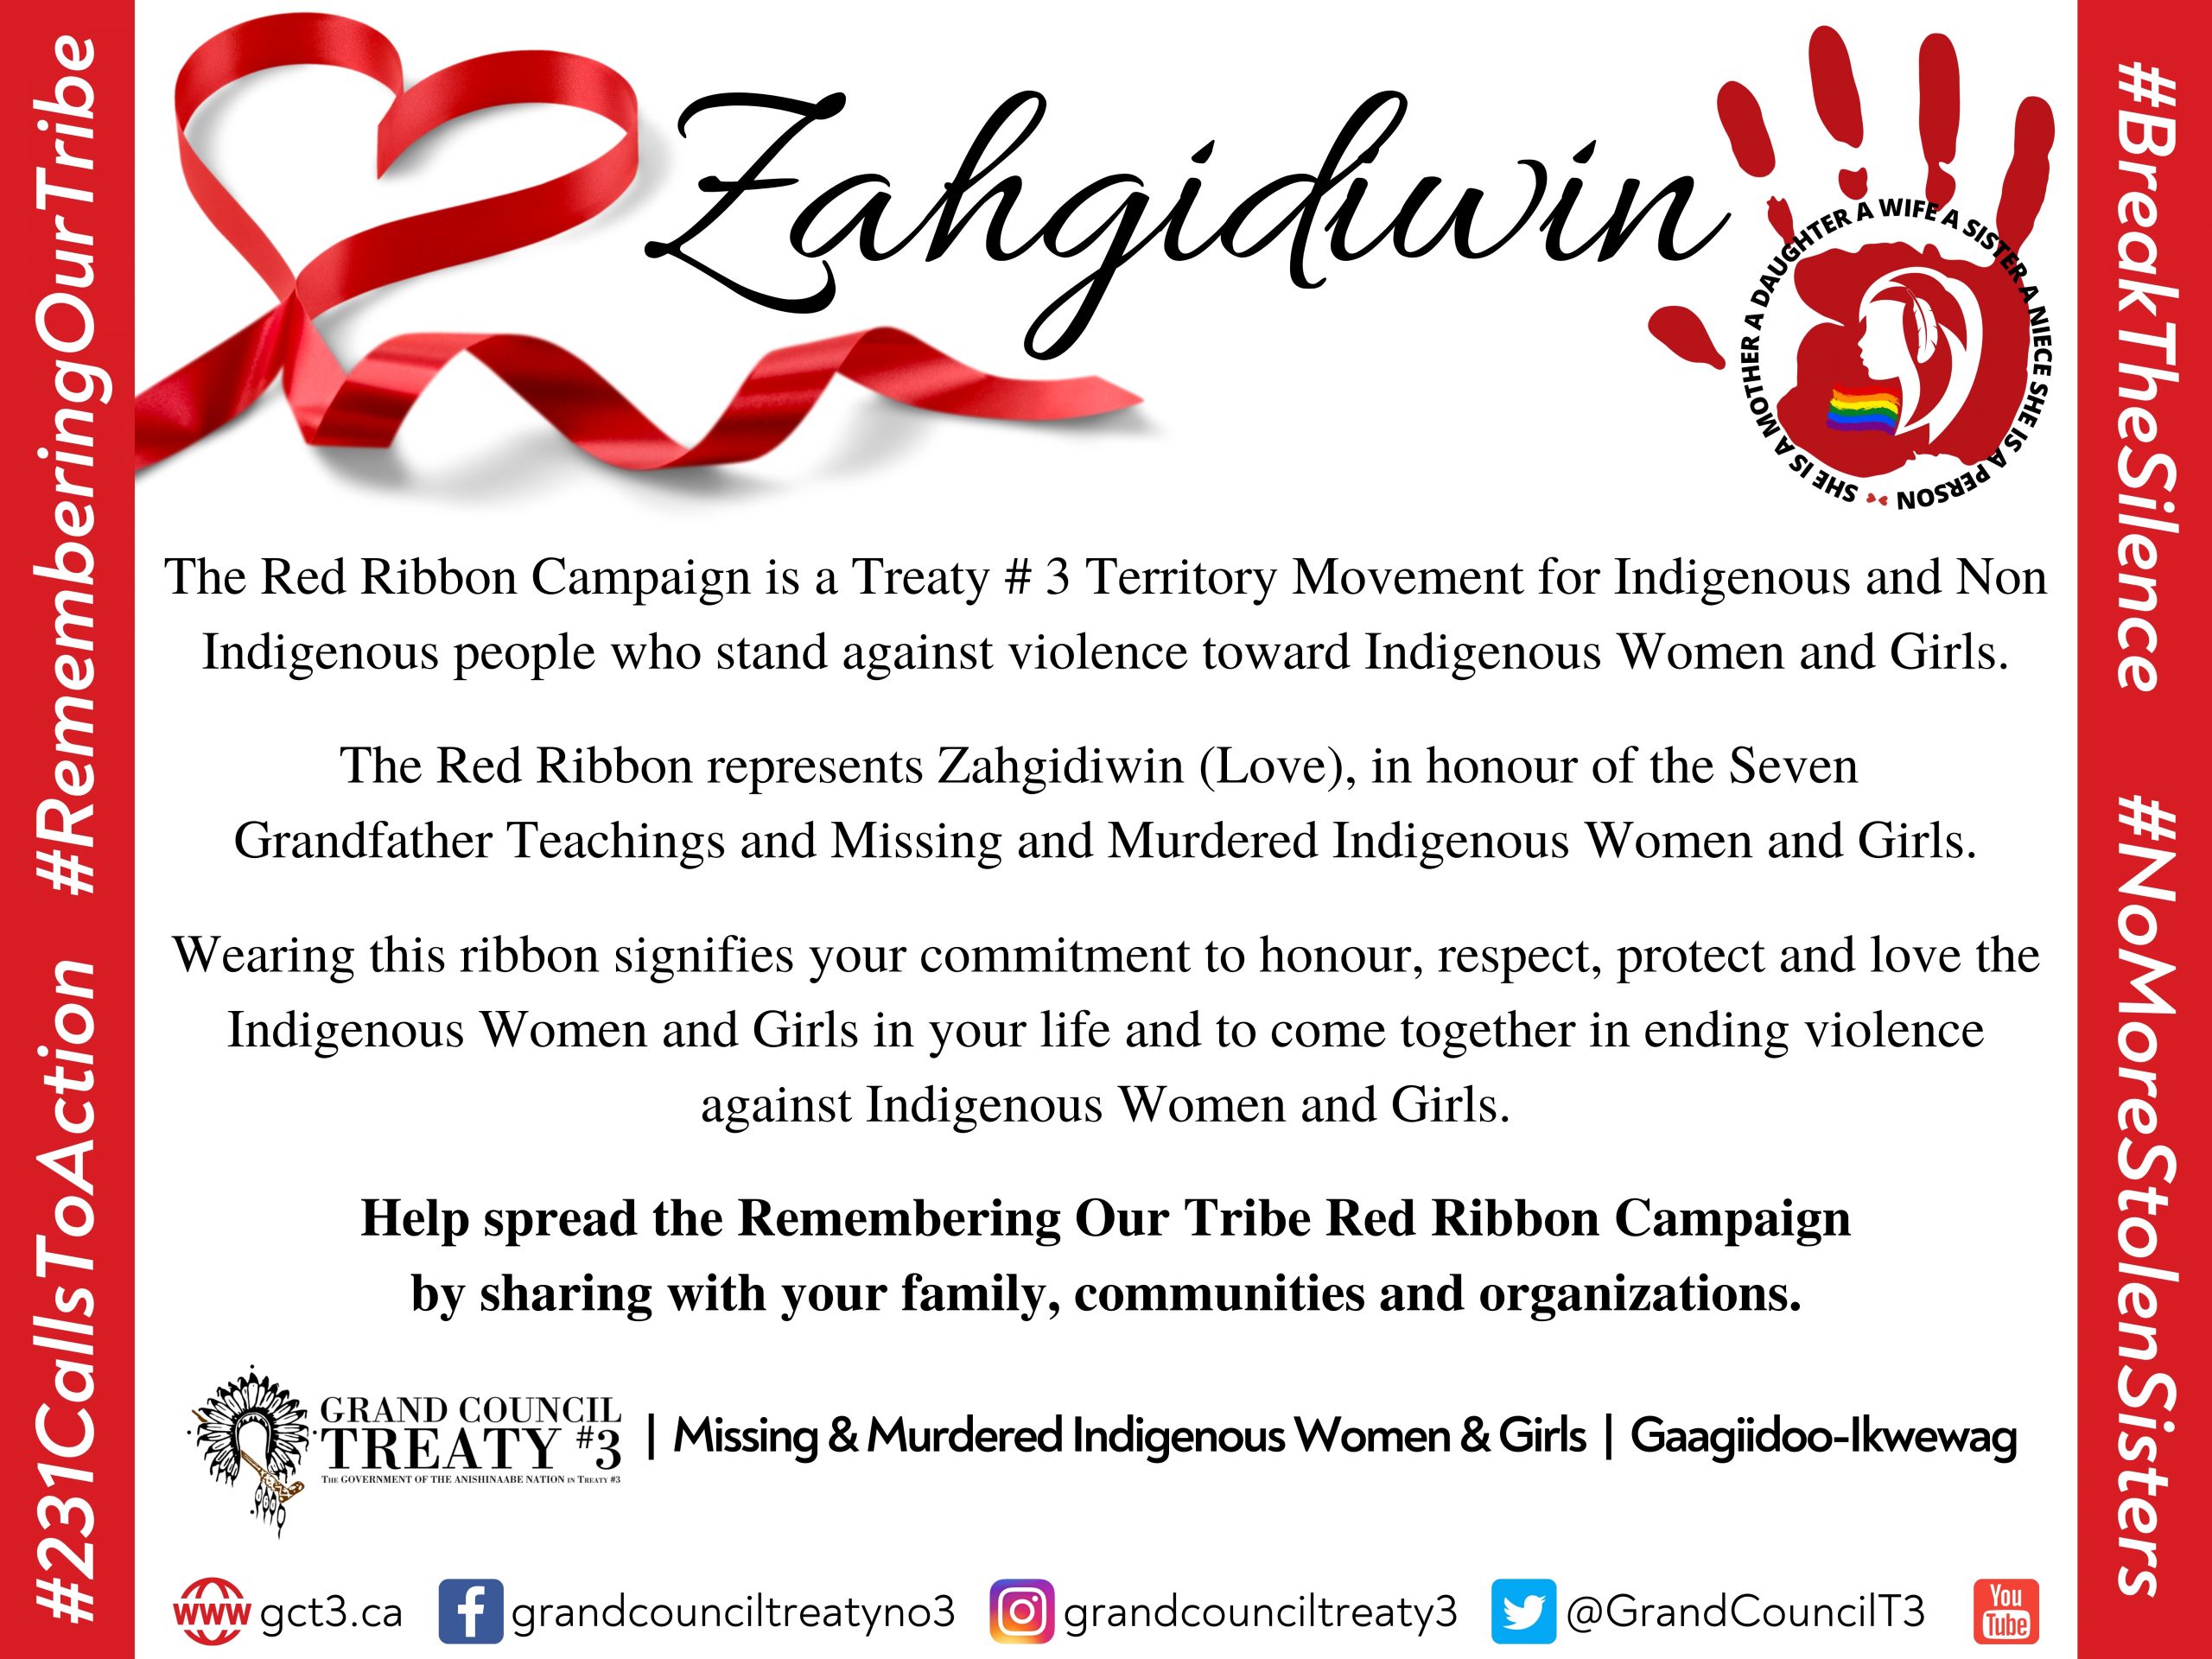 Grand Council Treaty #3 introduces The Red Ribbon Campaign in